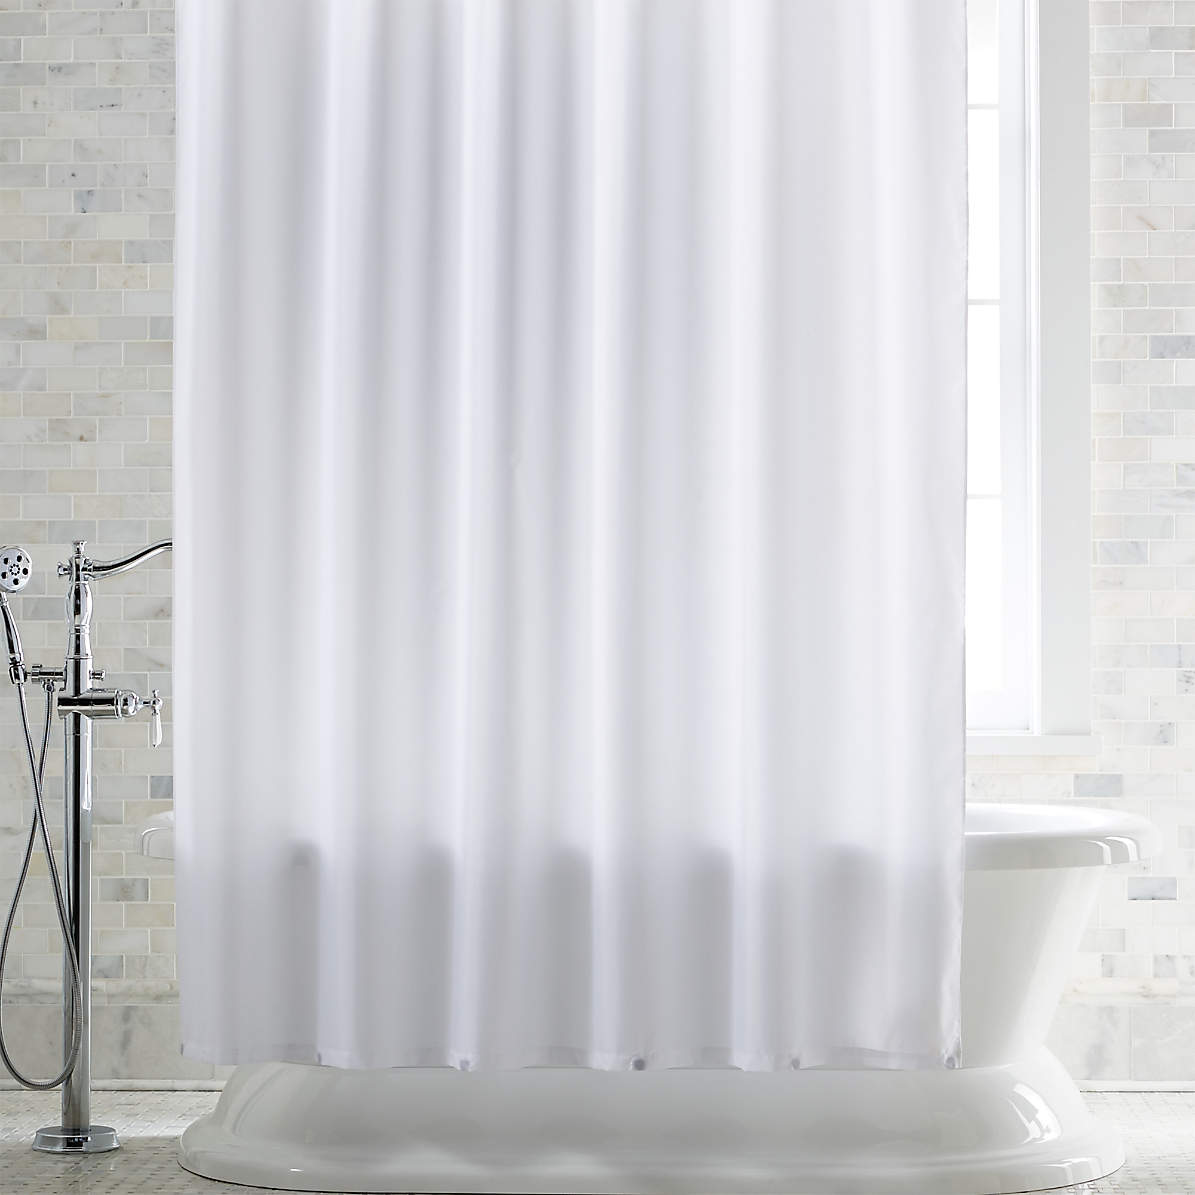 White Shower Curtain Liner With Magnets, Do Shower Curtains Come With Liners